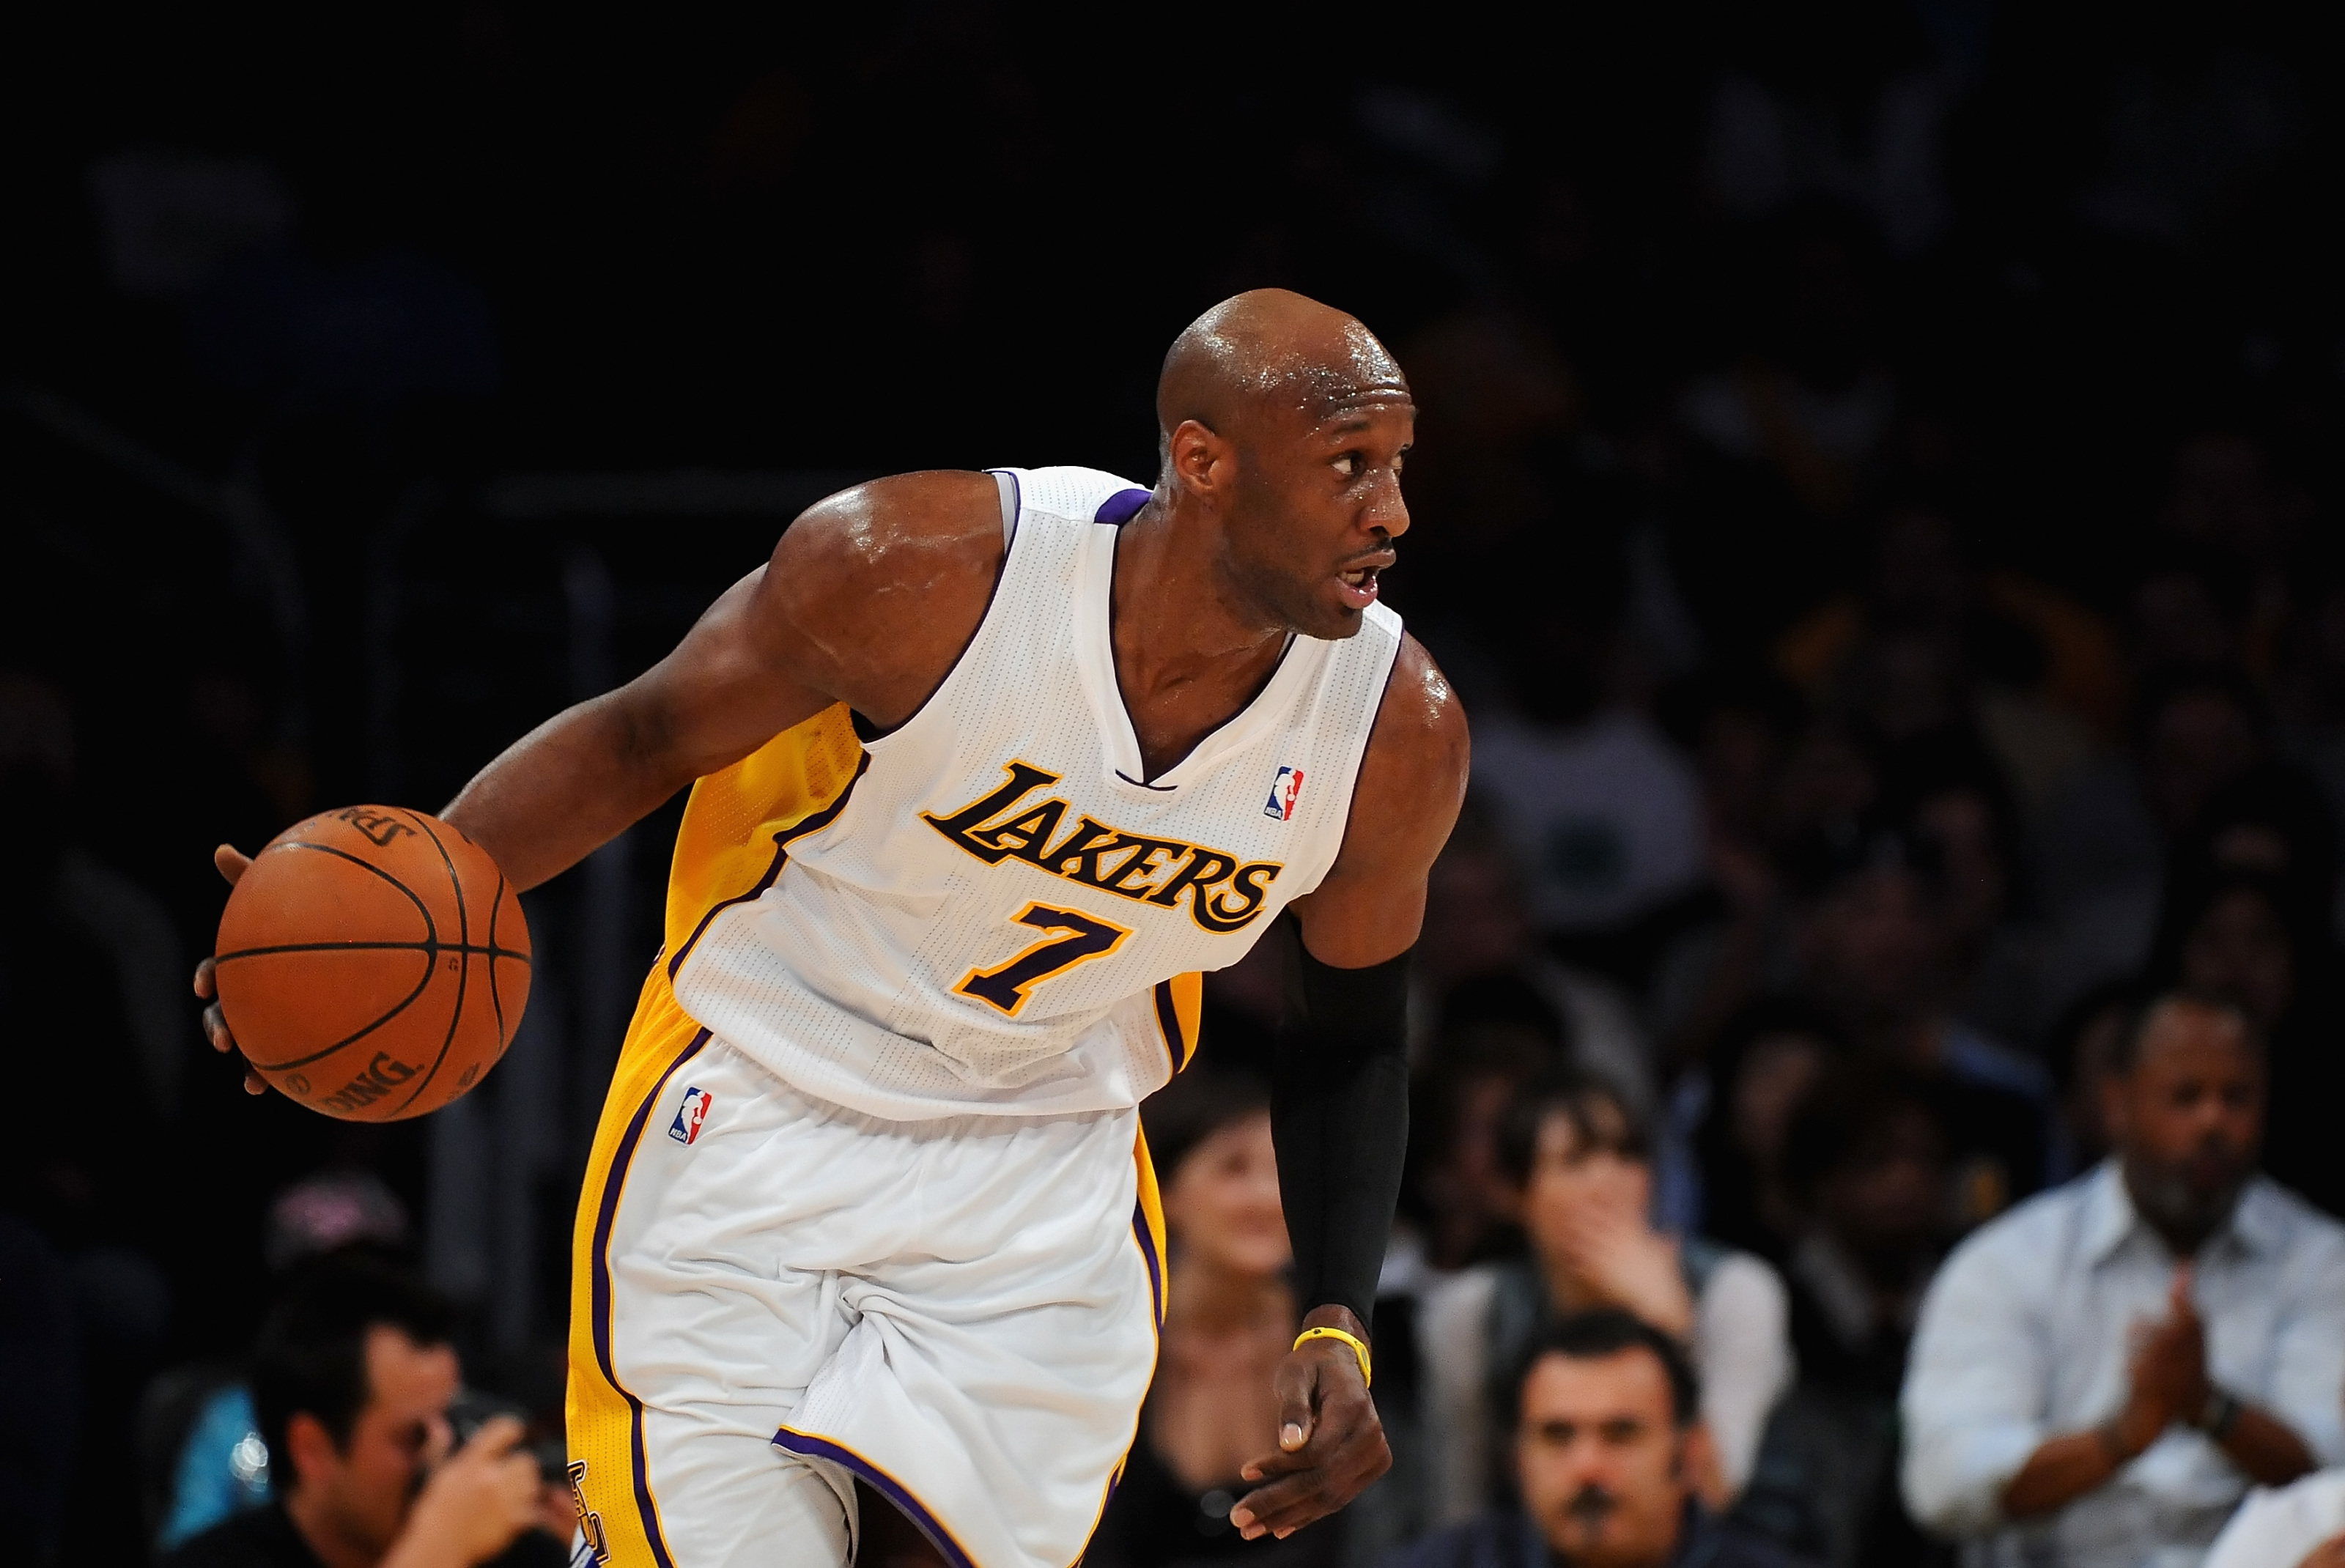 Looking back on Lamar Odom and his time with the Los Angeles Lakers